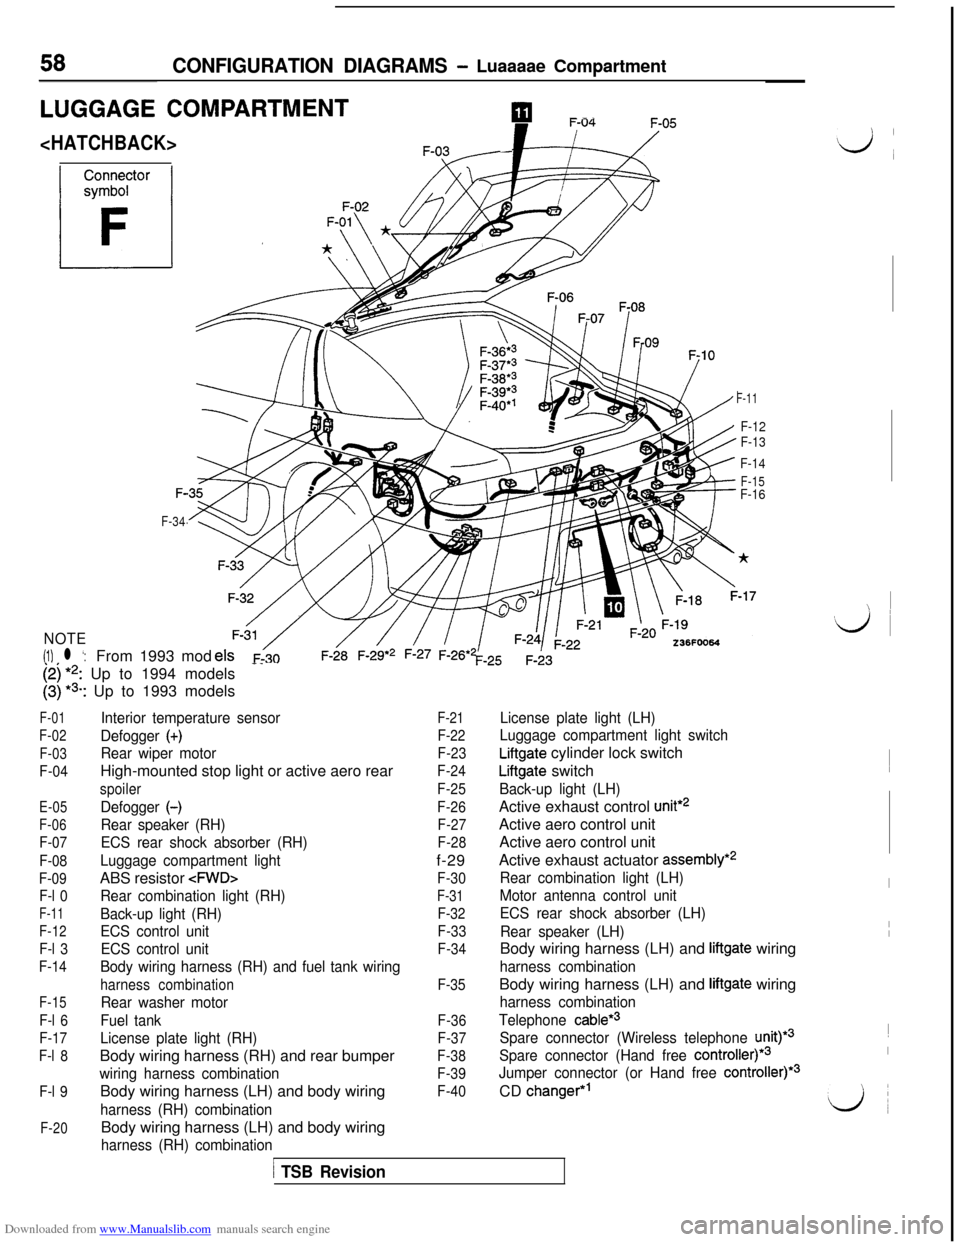 MITSUBISHI 3000GT 1993 2.G Repair Manual Downloaded from www.Manualslib.com manuals search engine 58CONFIGURATION DIAGRAMS - Luaaaae Compartment
LUGGAGE COMPARTMENTpIl --.
<HATCHBACK>-
F-11
F-12
F-13
F-14
F-15F-F-16
F-34
NOTE
(1) l ‘:From 